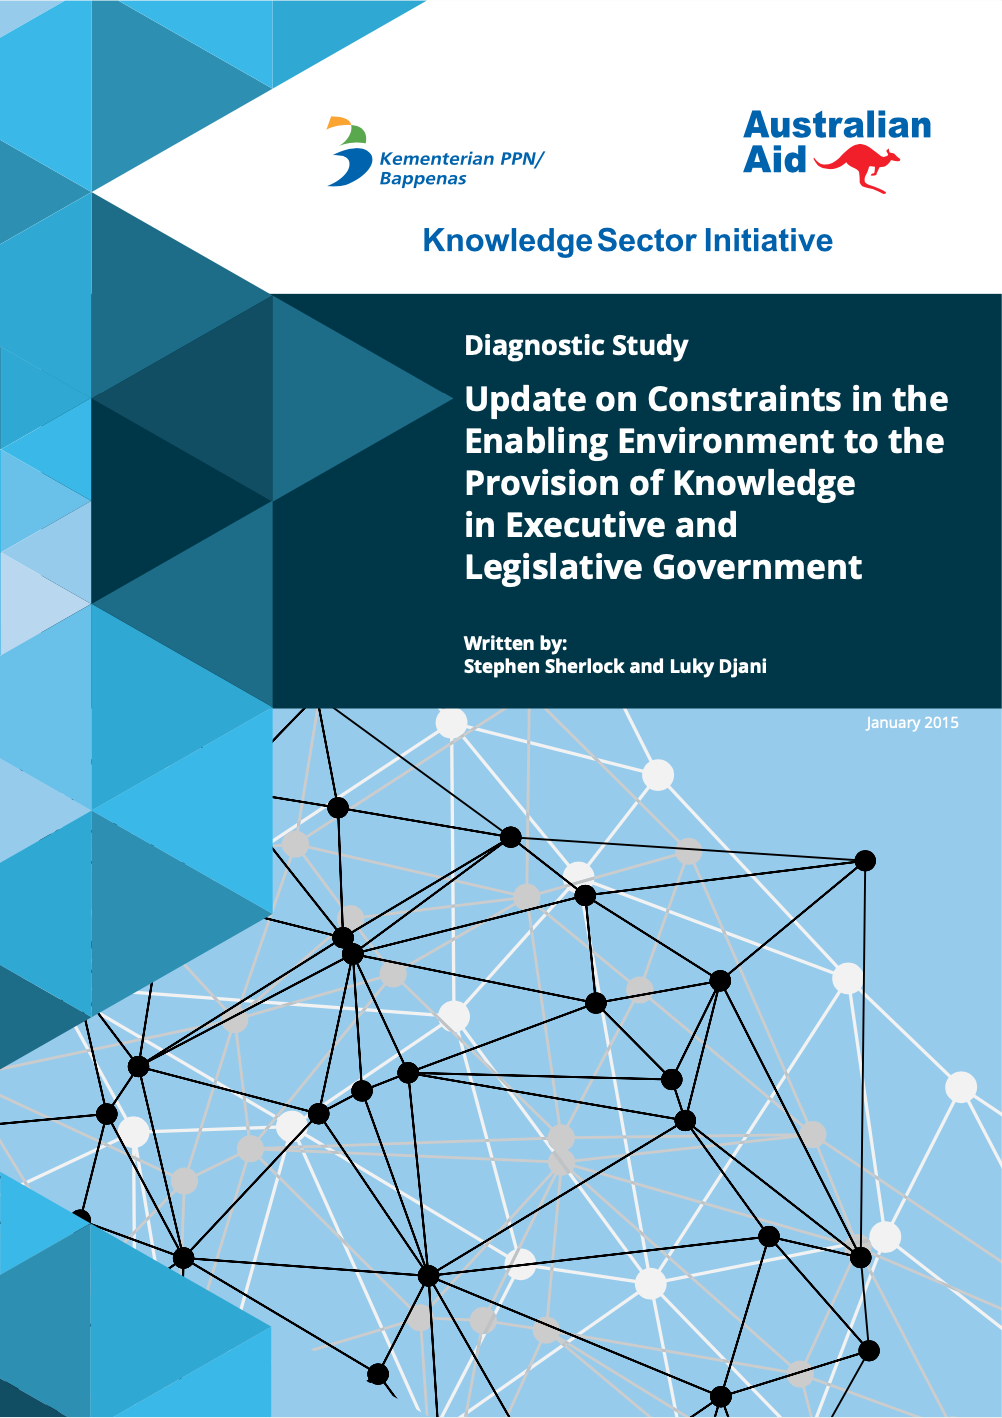 Update on Constraints in the Enabling Environment to the Provision of Knowledge in Executive and Legislative Government